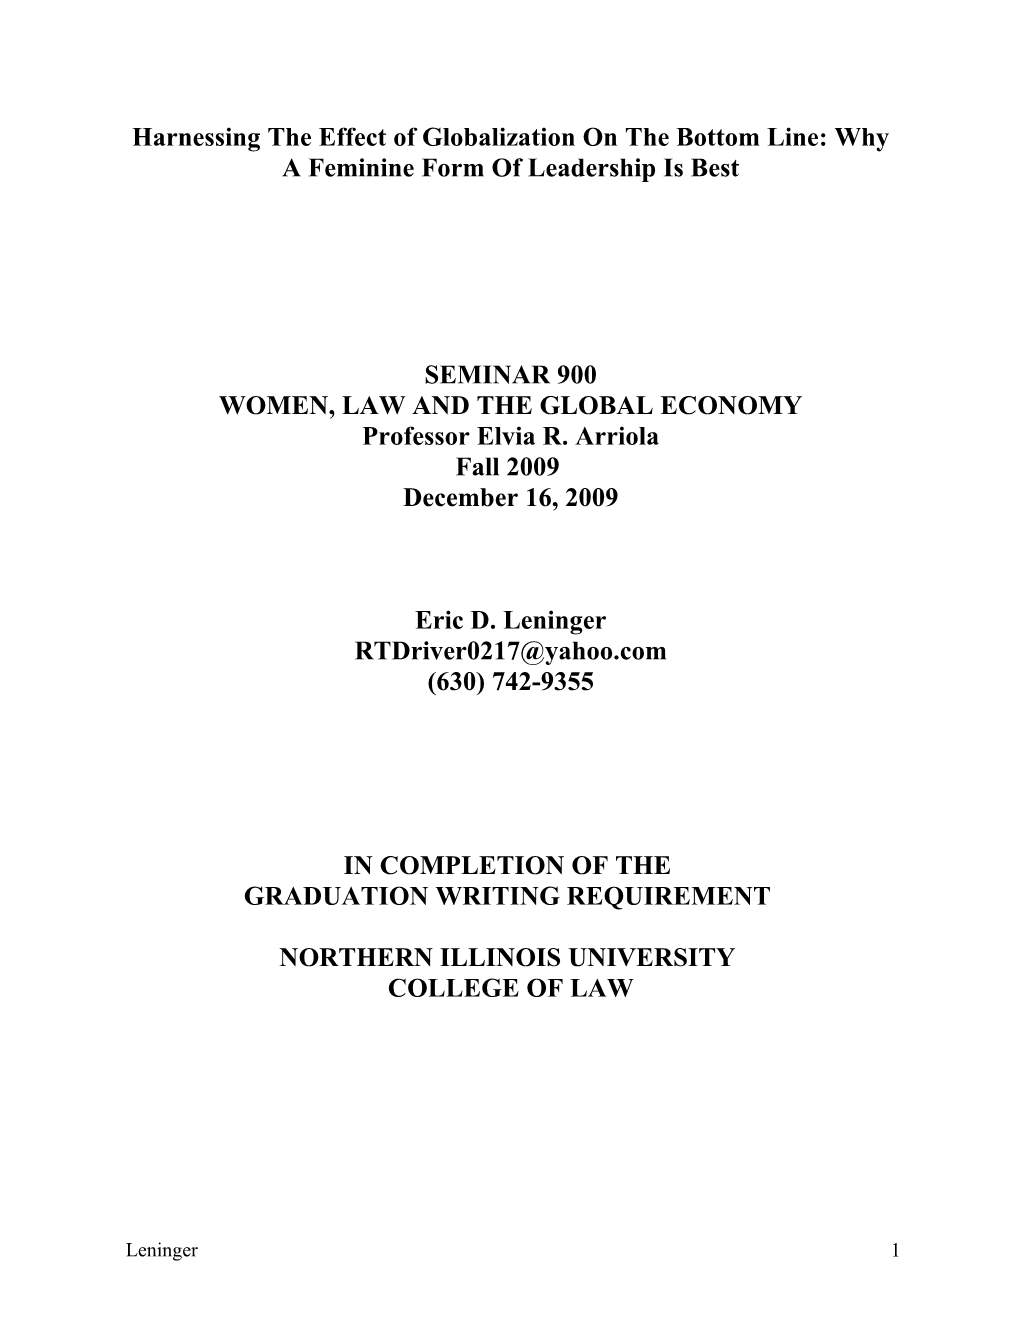 Harnessing the Effect of Globalization on the Bottom Line: Why a Woman S Approach Is Best